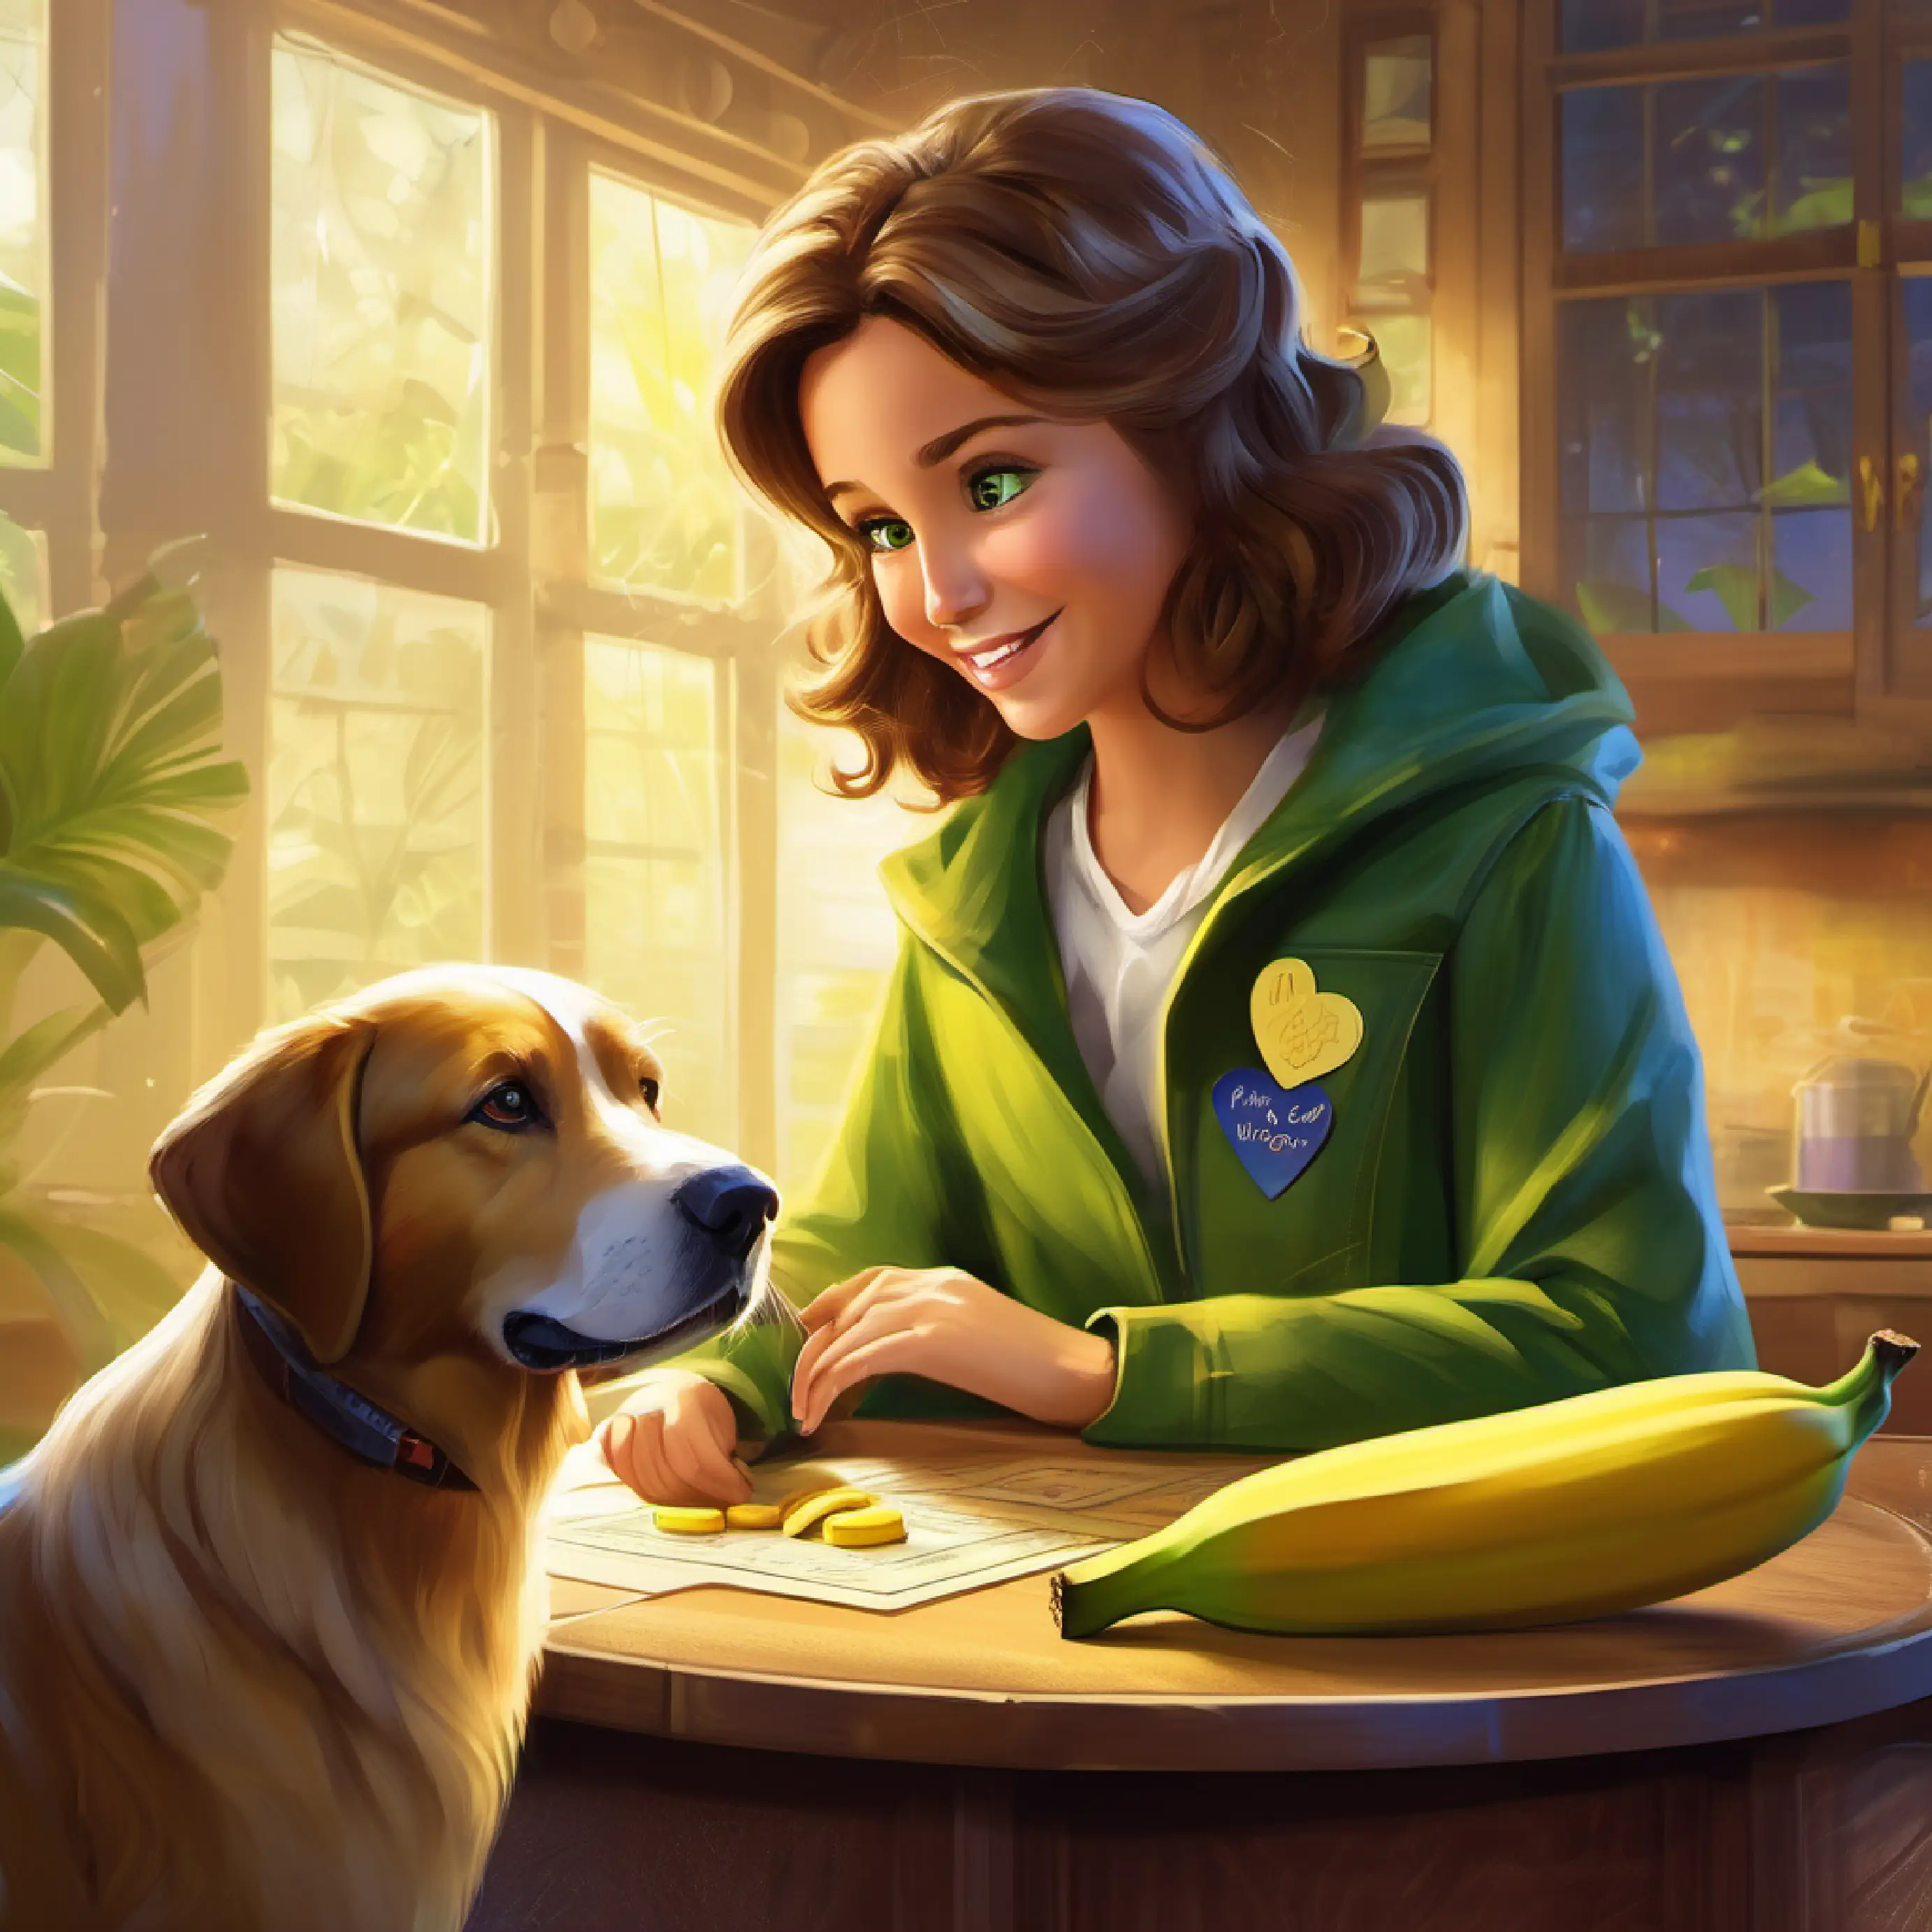 Golden coat, loves bananas, smart dog and Caring owner, helps with counting, brown hair, green eyes host a 'Math Day'.